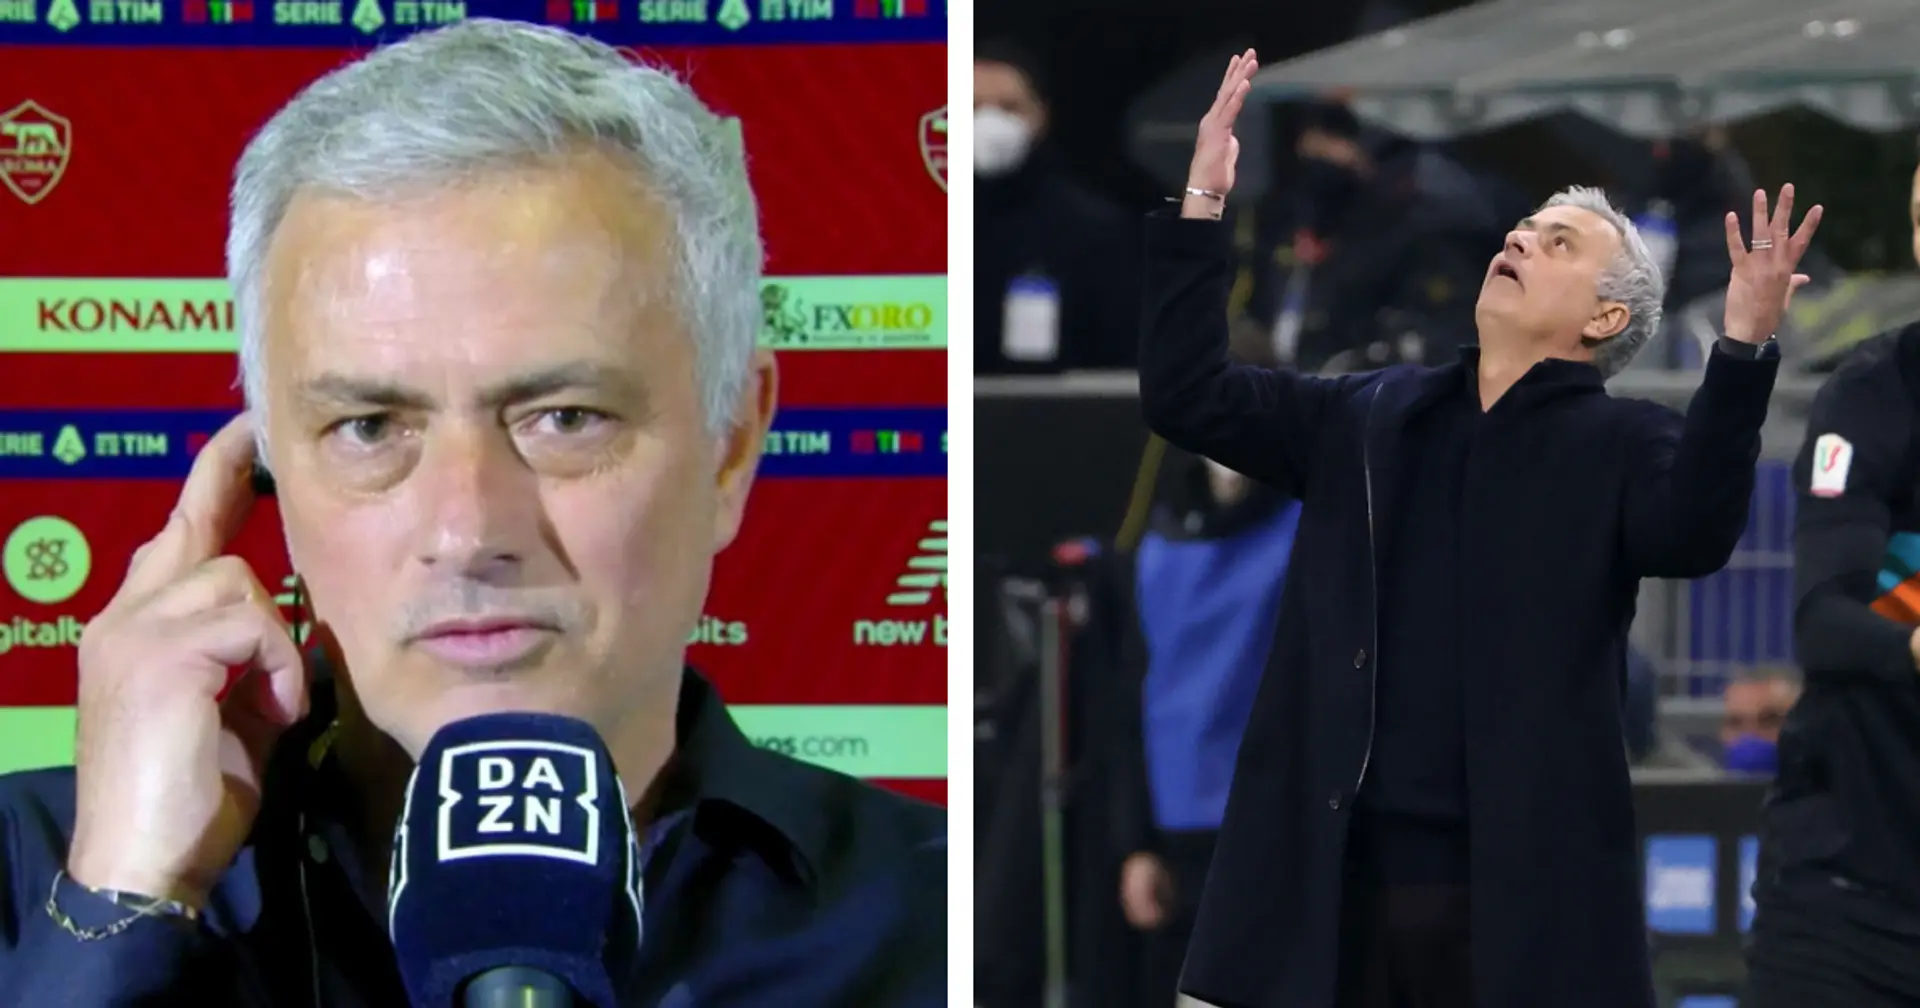 'A man's biggest flaw is a lack of balls': Jose Mourinho reportedly rips into Roma players after Inter defeat